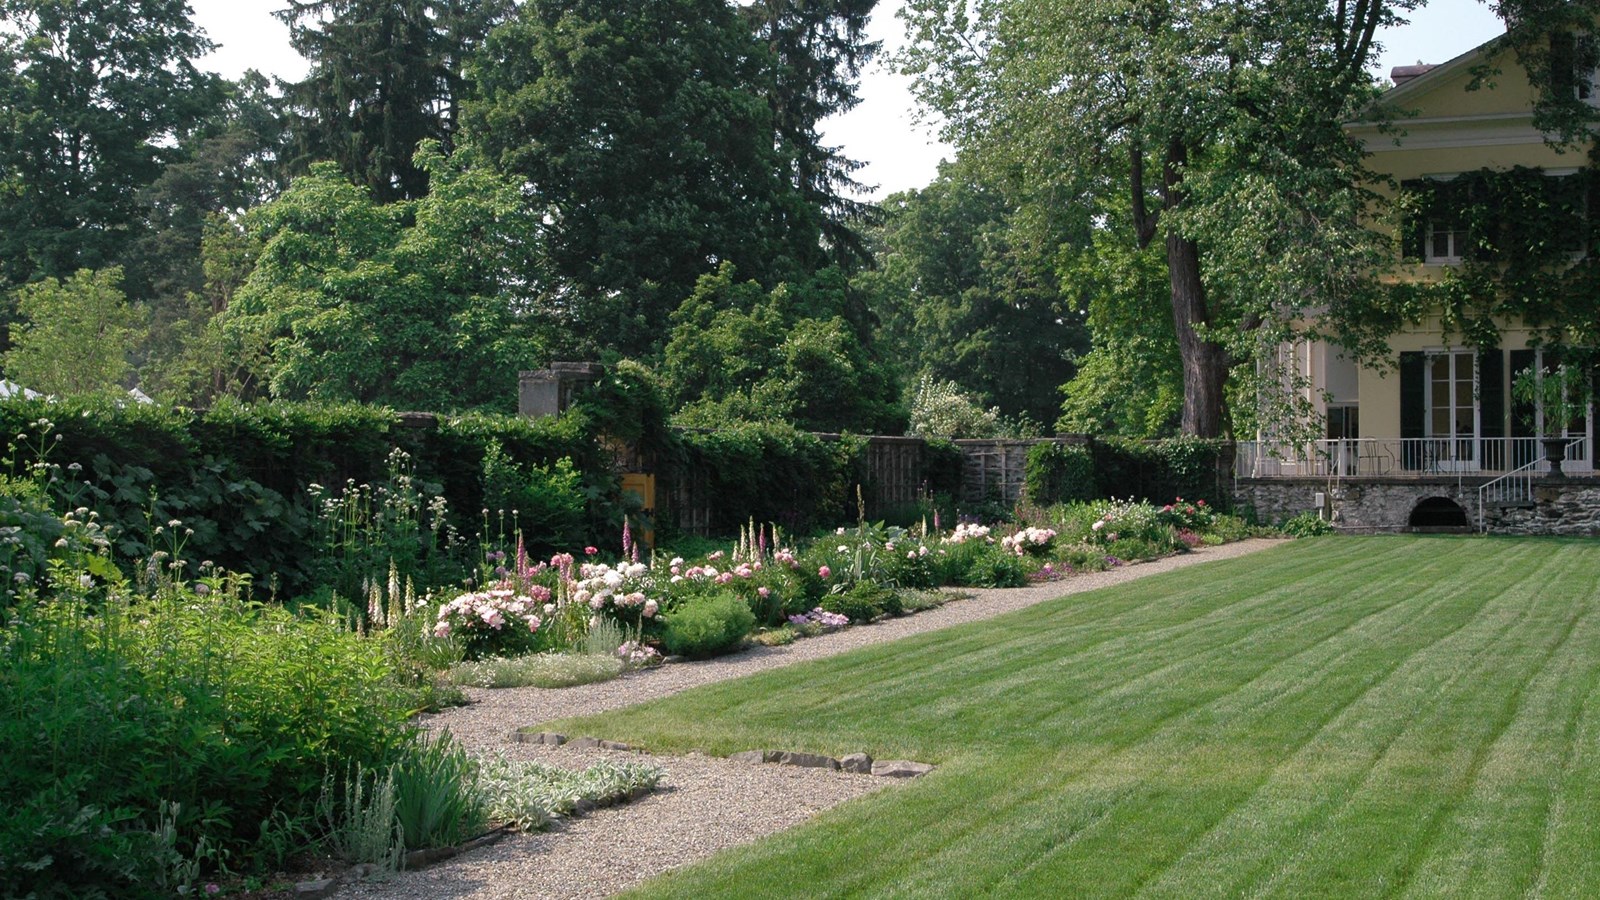 A green lawn surrounded by a tall stone wall and rectangular beds planted with flowers.